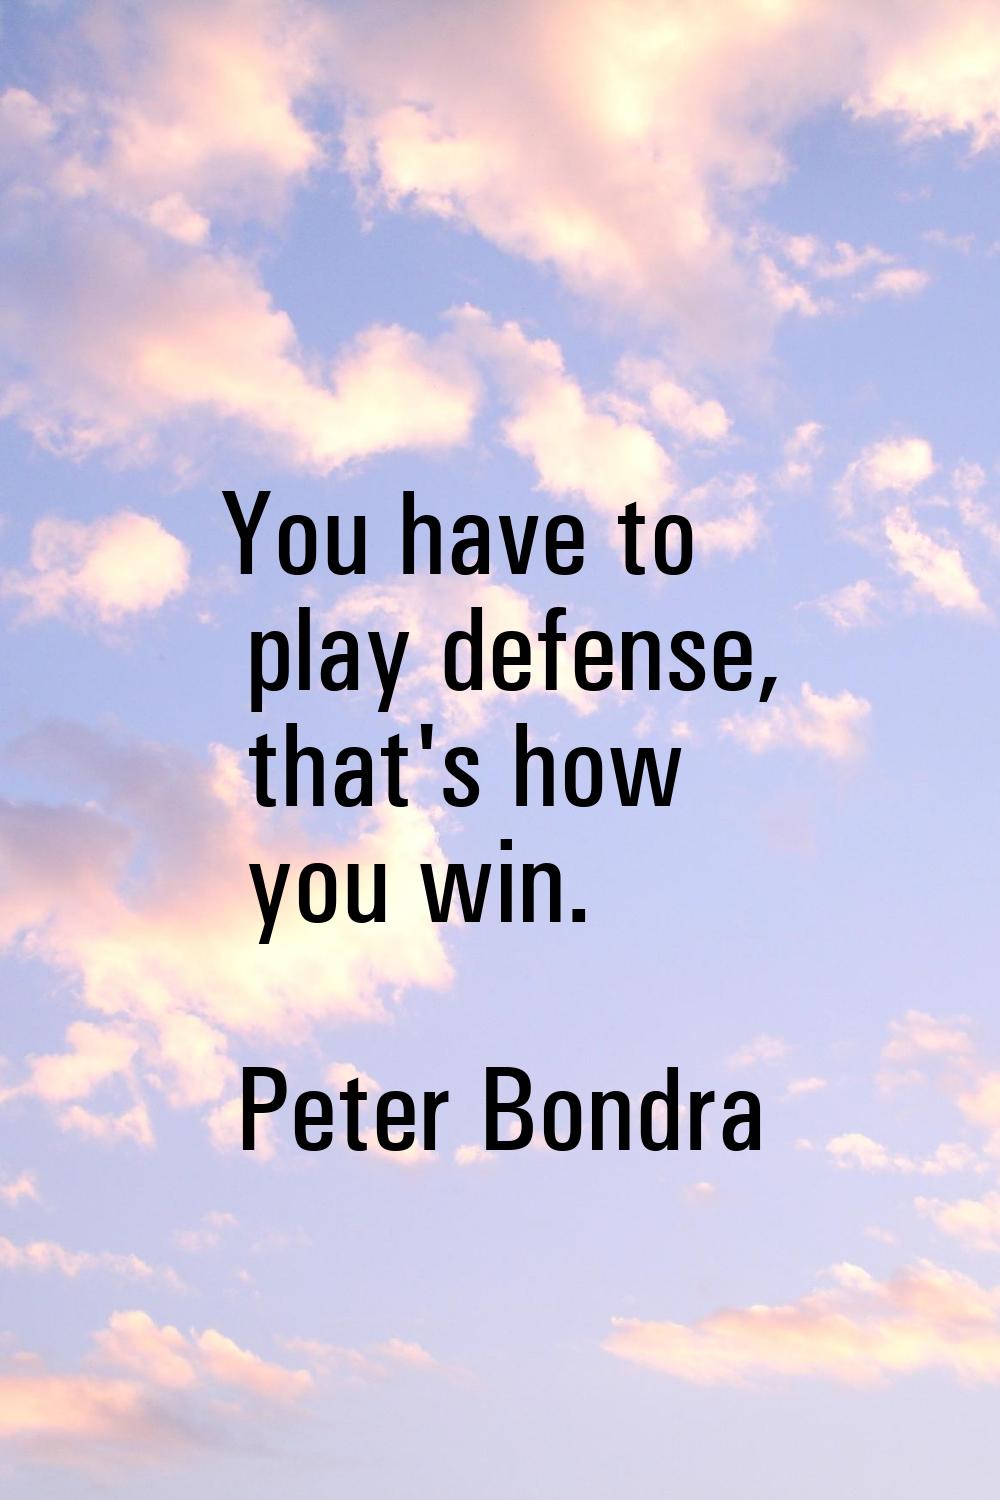 You have to play defense, that's how you win.